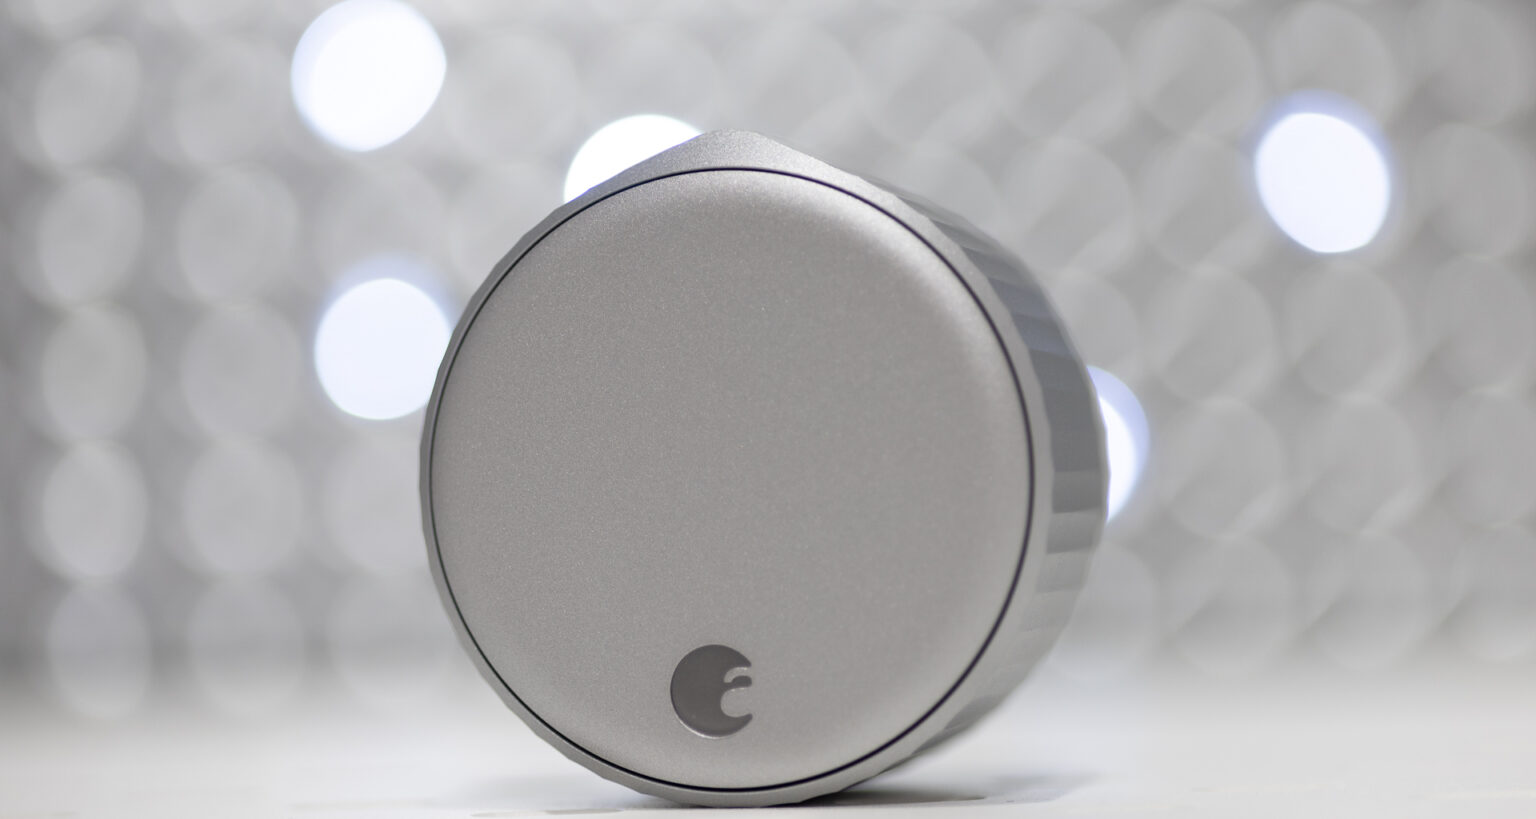 The August Wi-Fi Smart Lock. Image: Digitized House.